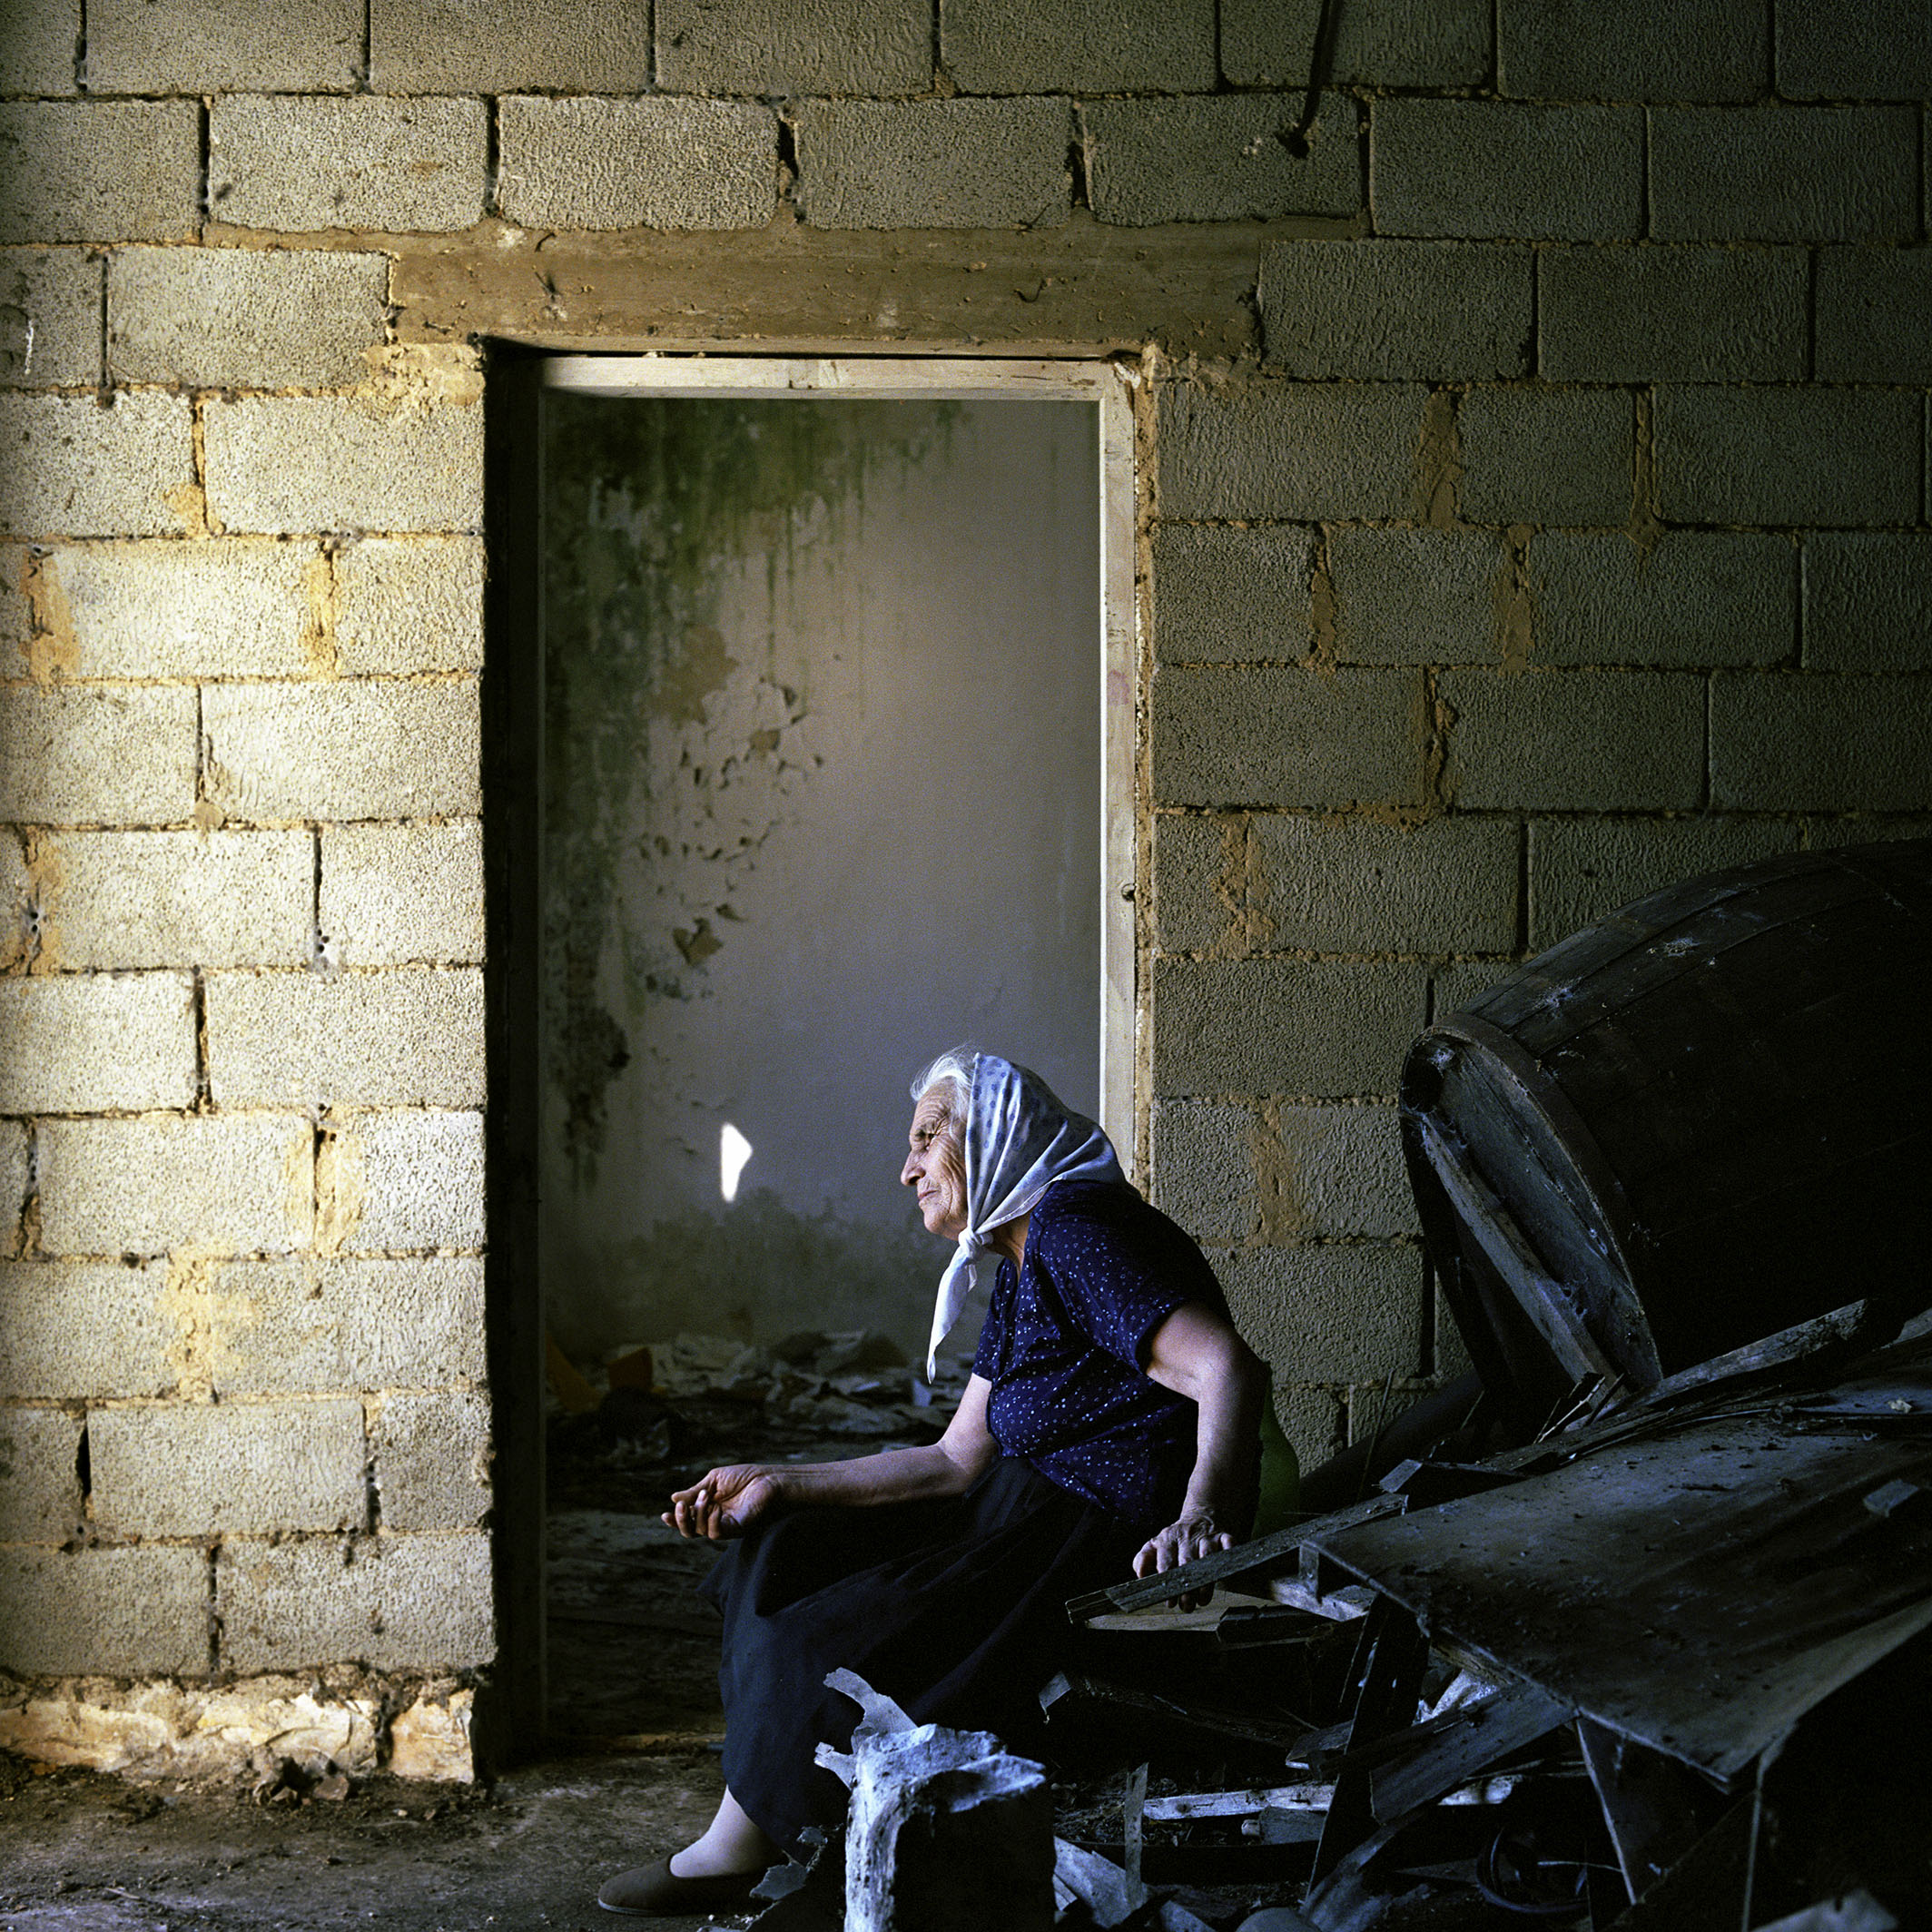  Maria Banic rests while cleaning out her dilapidated home the day after she and her husband Branko returned to Croatia from 11 years of exile in Serbia.  